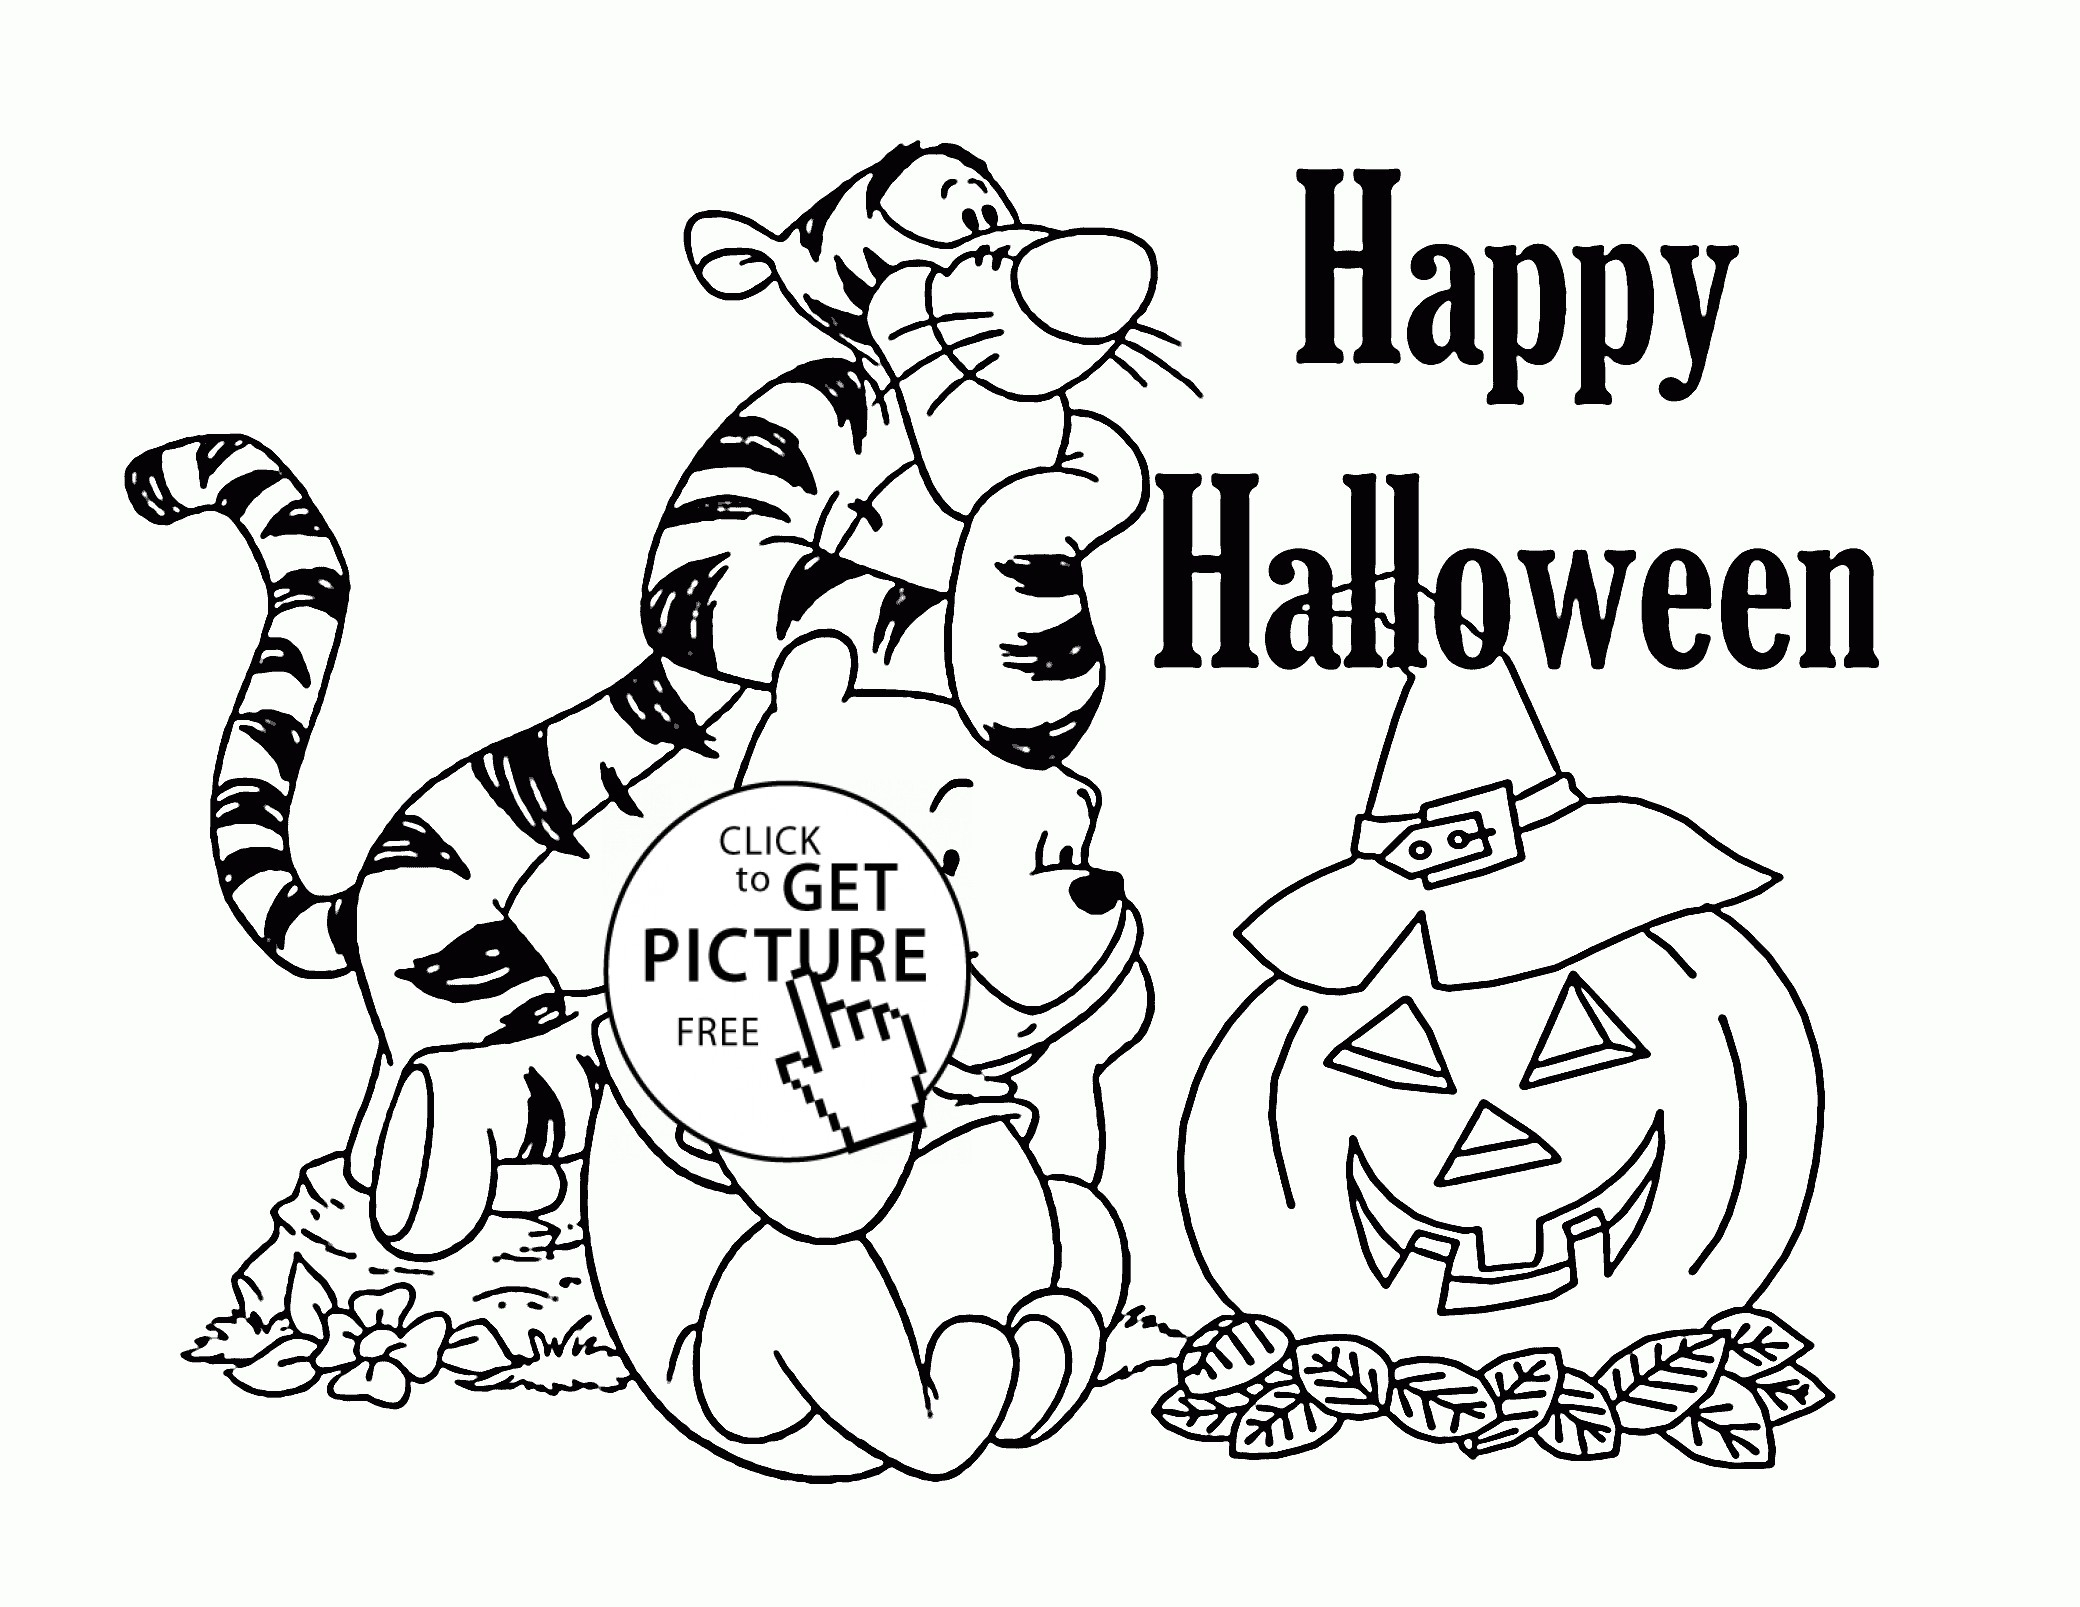 Halloween Coloring Pages For Kids at GetColorings.com | Free printable